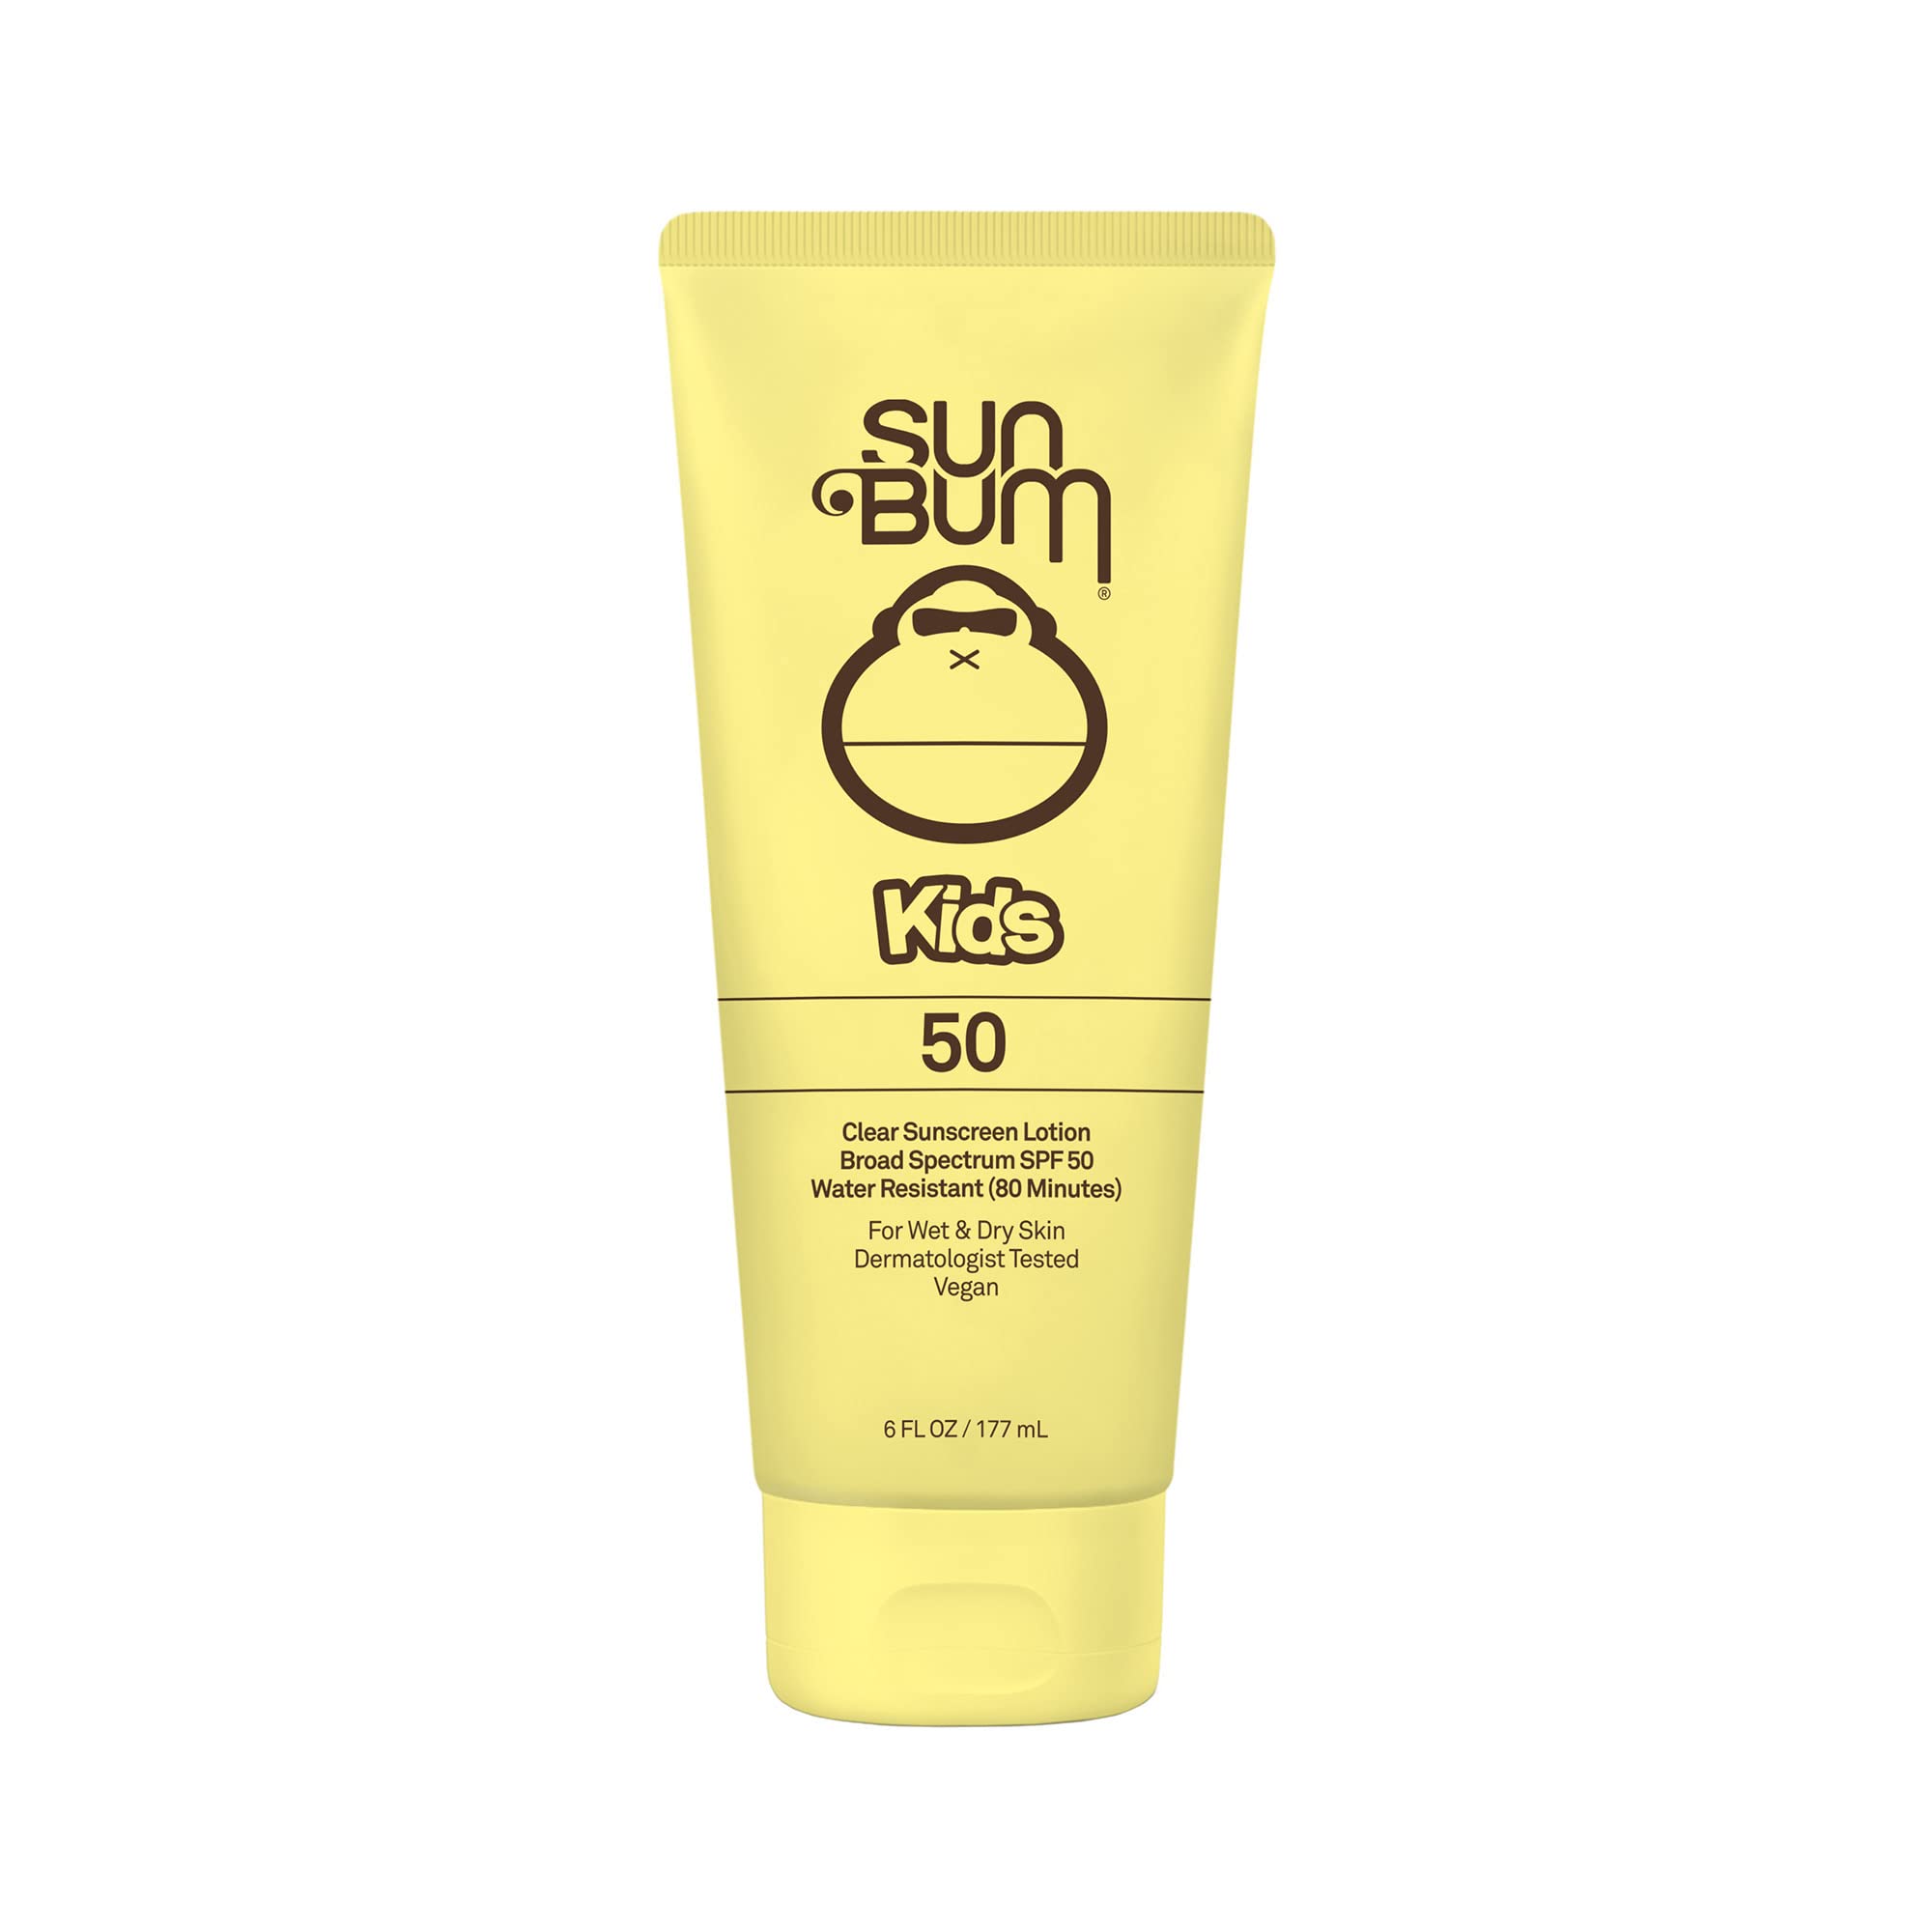 Sun Bum Kids SPF 50 Clear Sunscreen Lotion | Wet or Dry Application | Hawaii 104 Reef Act Compliant (Octinoxate & Oxybenzone Free) Broad Spectrum UVA/UVB Sunscreen | 6 oz